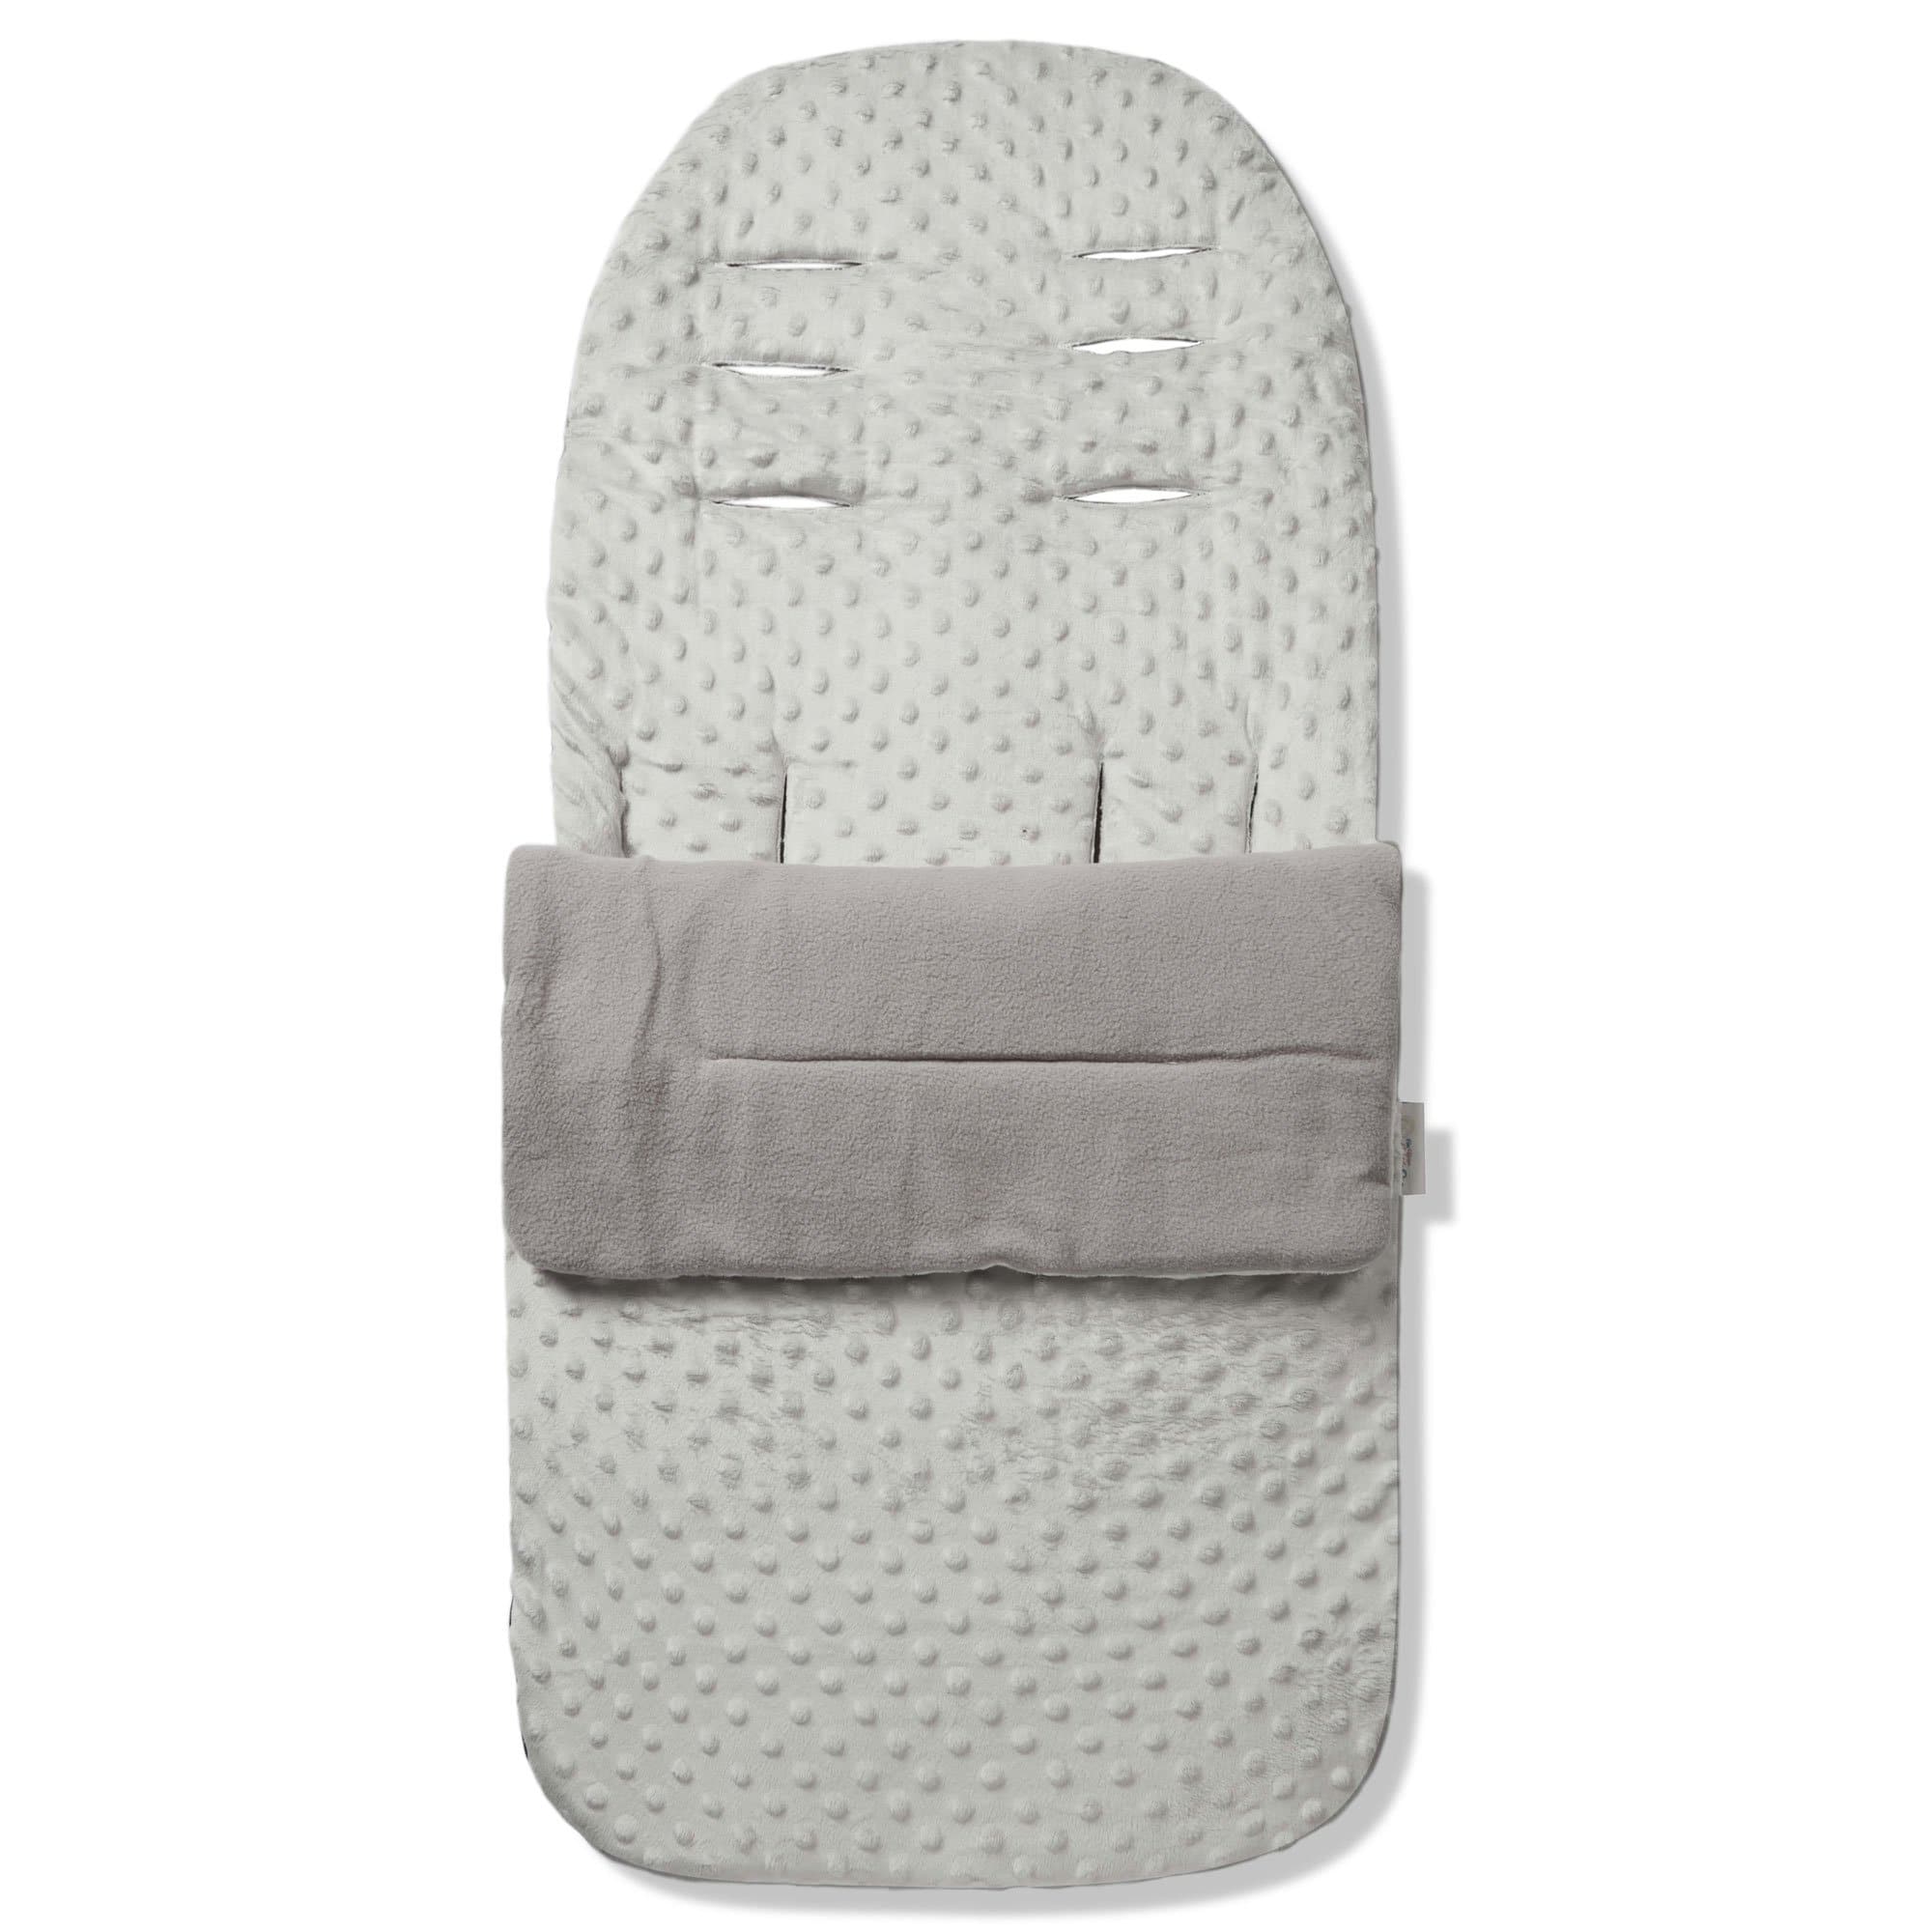 Dimple Footmuff / Cosy Toes Compatible with BabyStyle - Grey / Fits All Models | For Your Little One